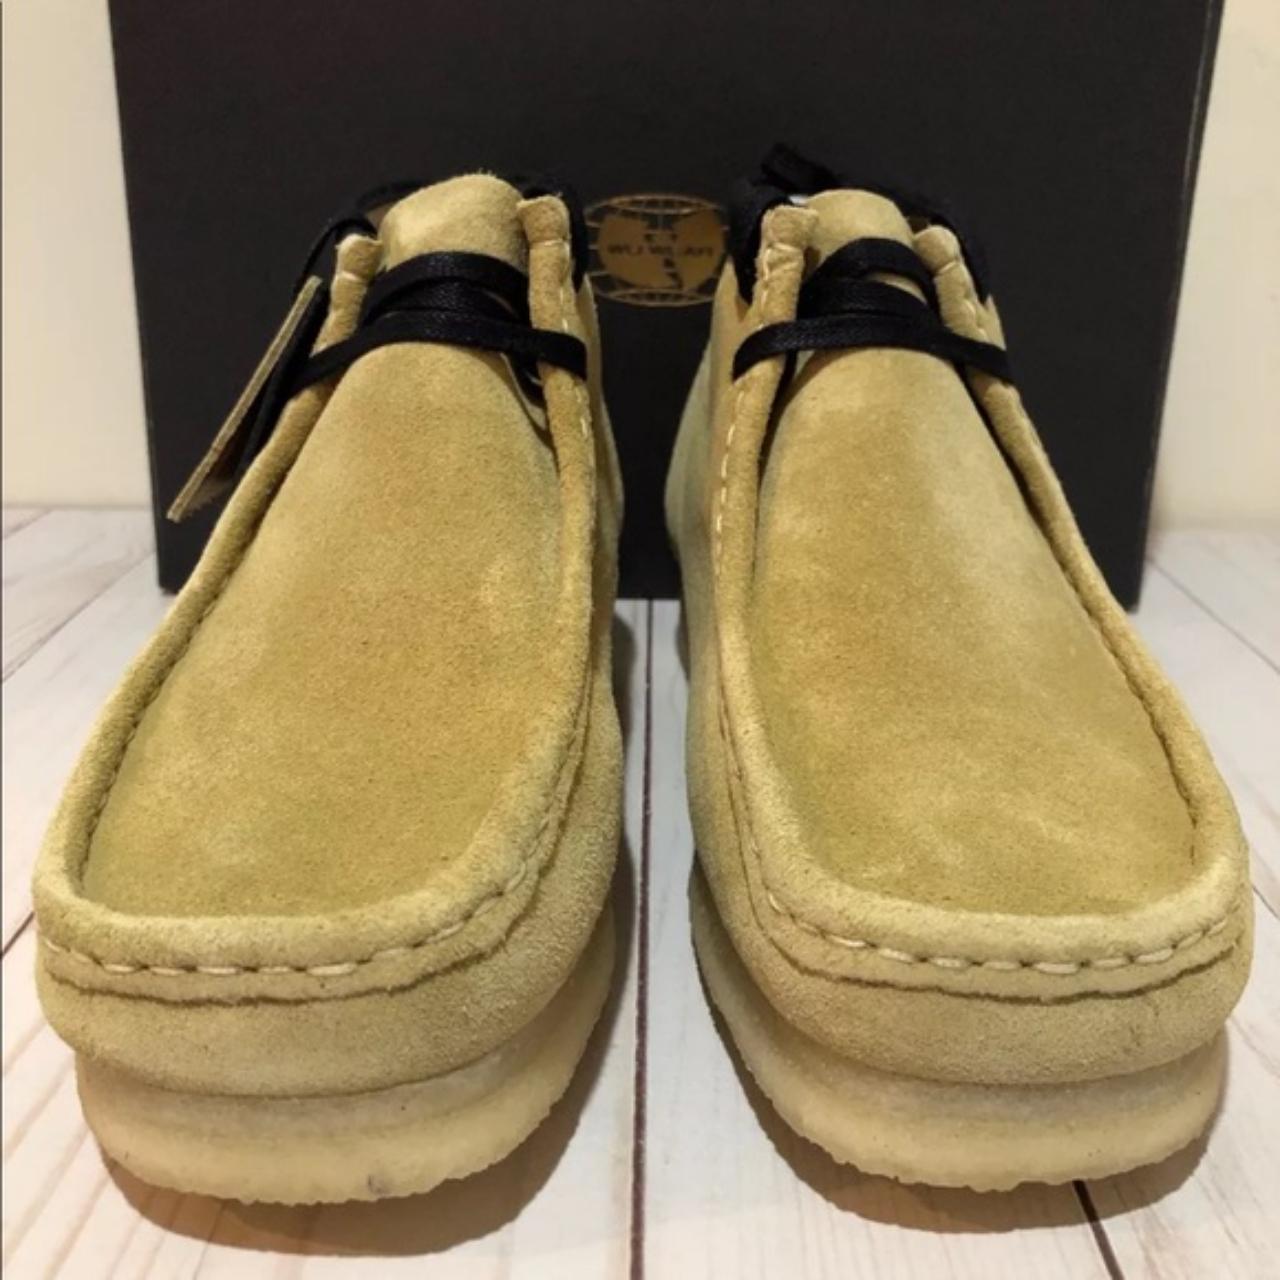 Clarks x Wu Tang Clan Wallabee Maple, Where To Buy